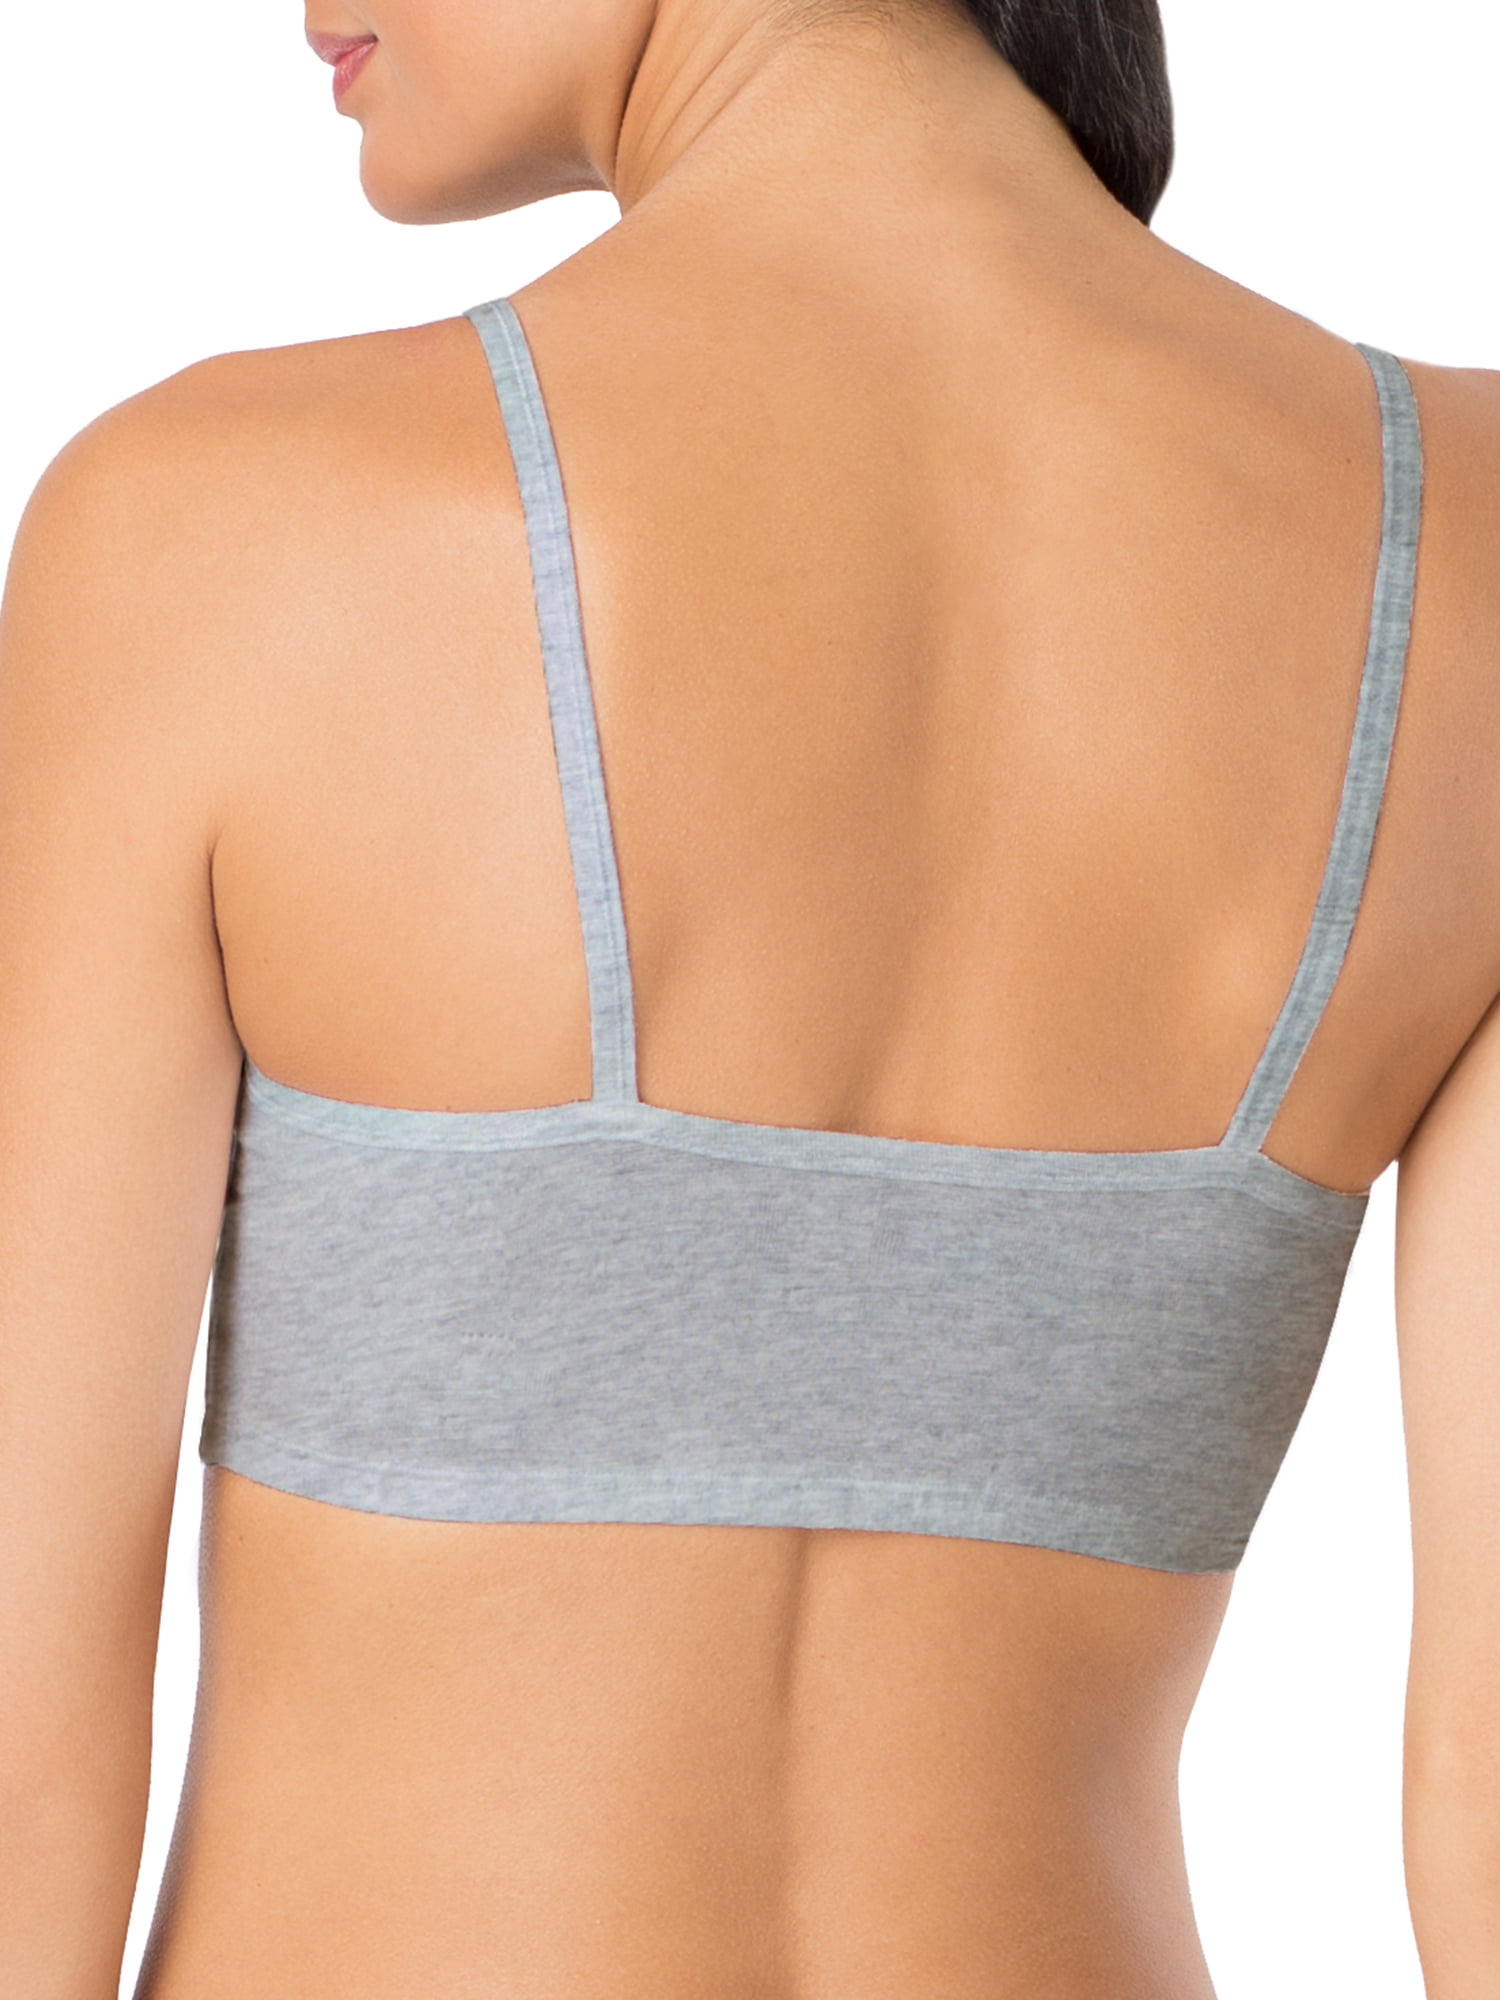 Cotton Plain Lovage Tube Bras- Ladies Sports Wear at Rs 200/piece